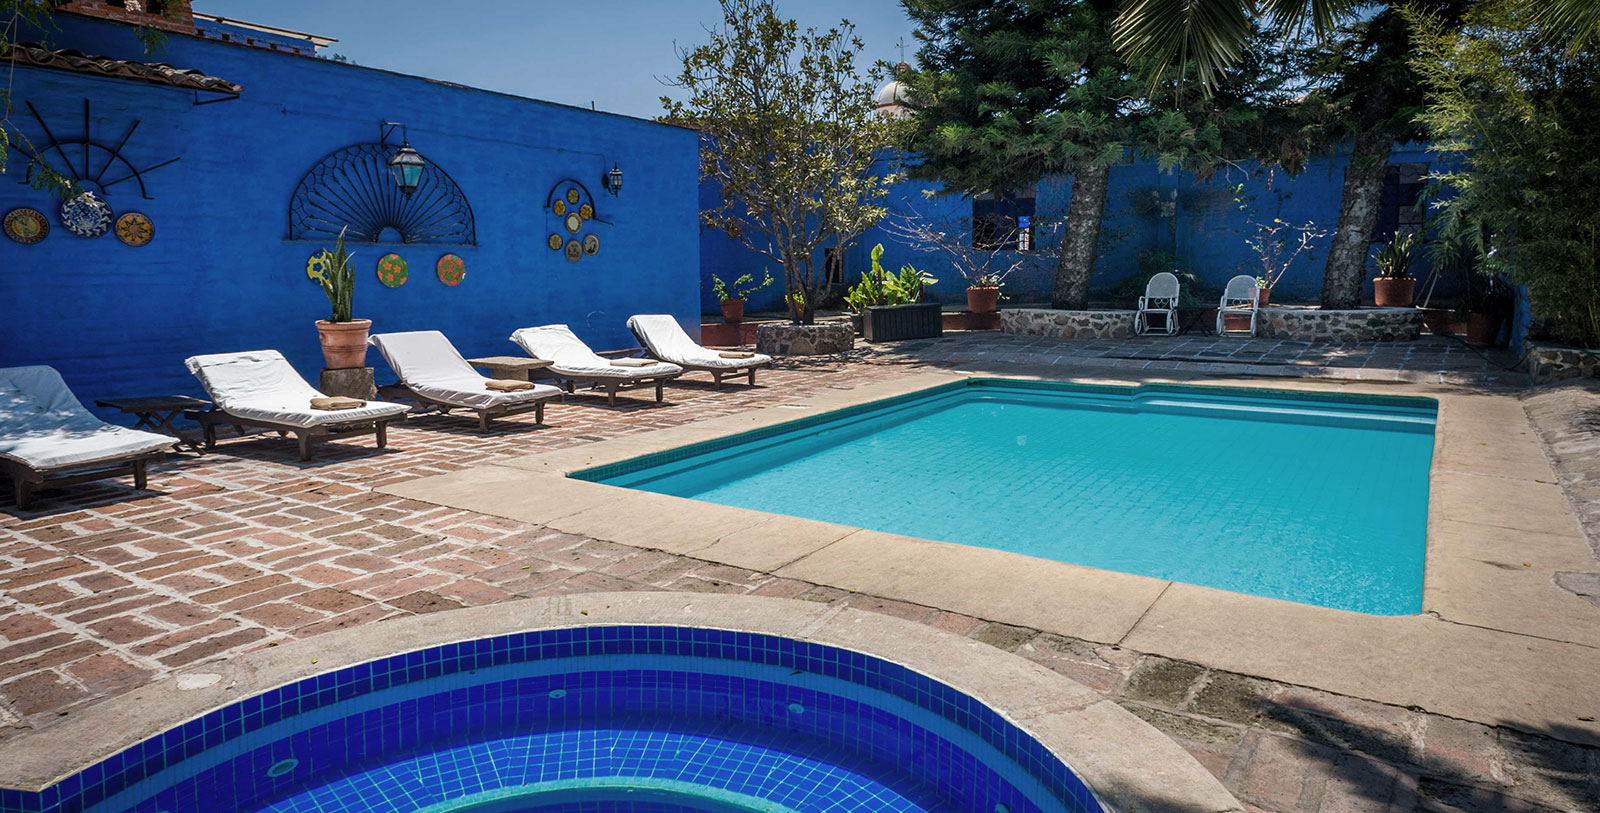 Experience a relaxing day rejuvenating poolside or at The Hacienda's Spa.